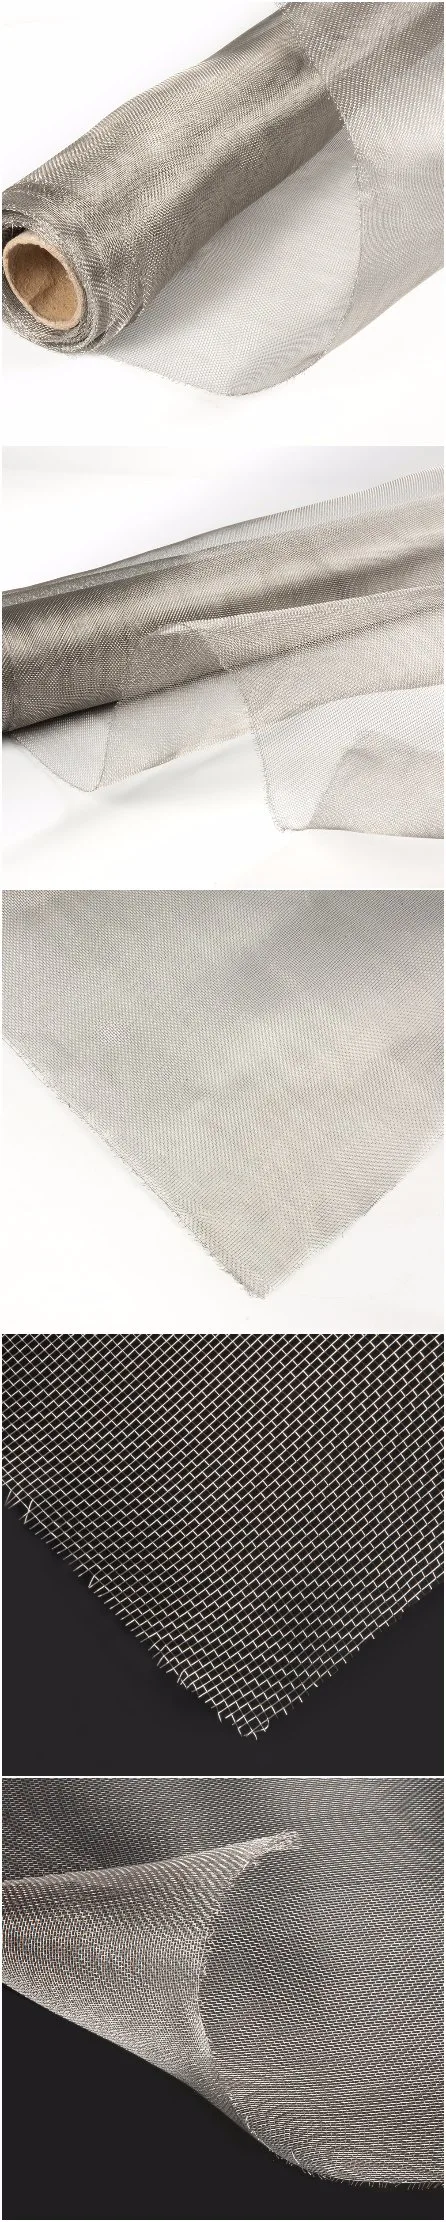 Amazon Ebay Wholesale Stainless Steel Grade 304 Insect Screen Window Screen Fly Screen